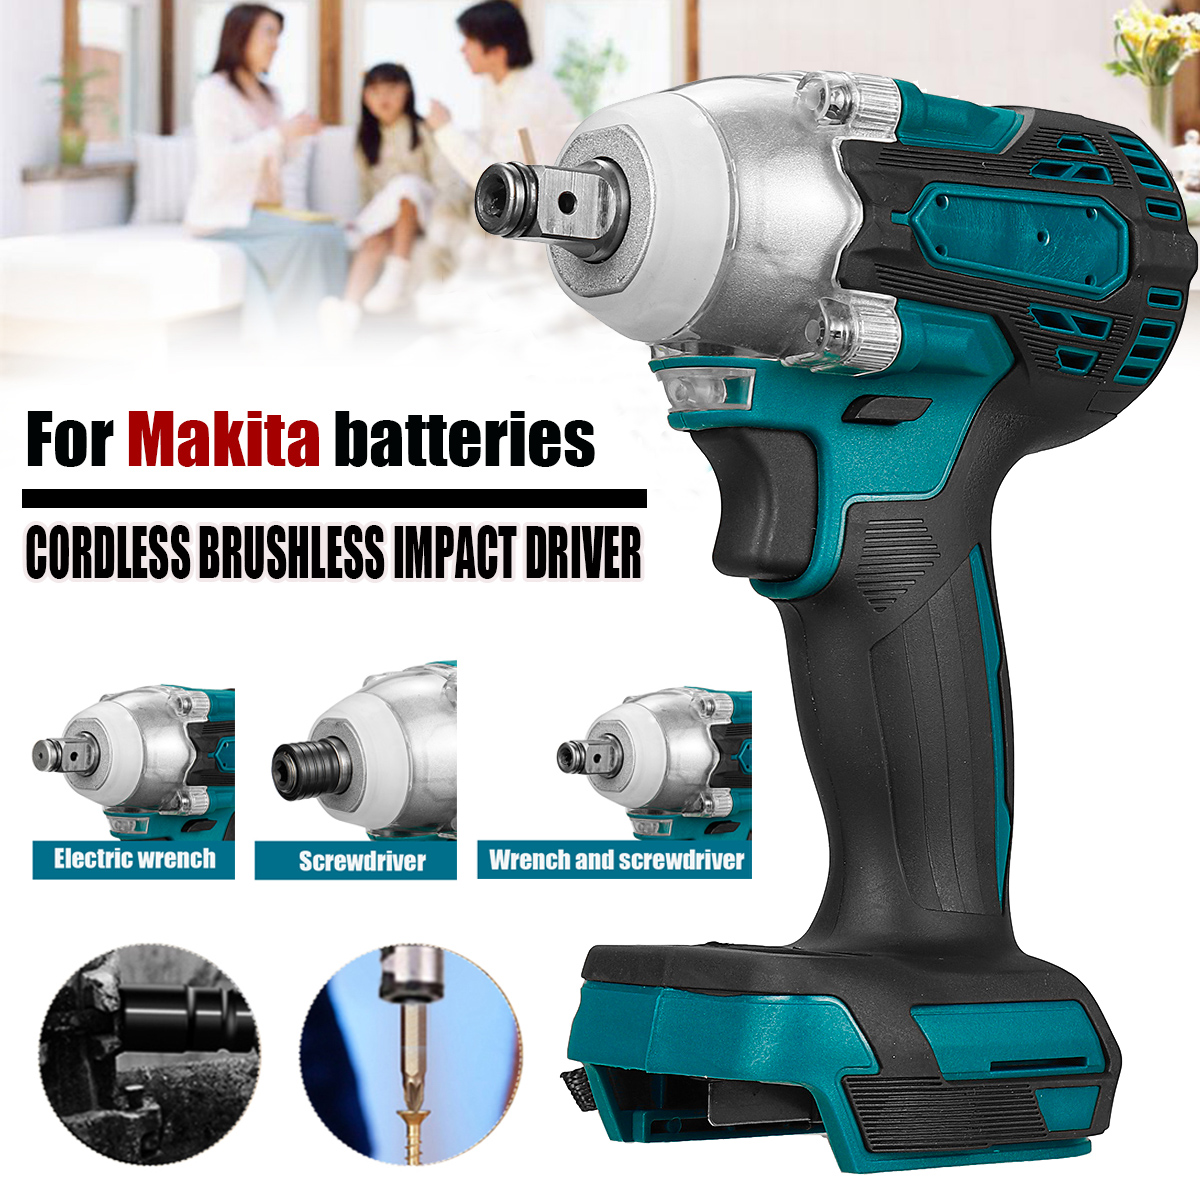 125mm-Cordless-Brushless-Impact-Wrench-Drill-Drive-Screwdriver-Power-Tool-For-Makita-18V-battery-1855969-3